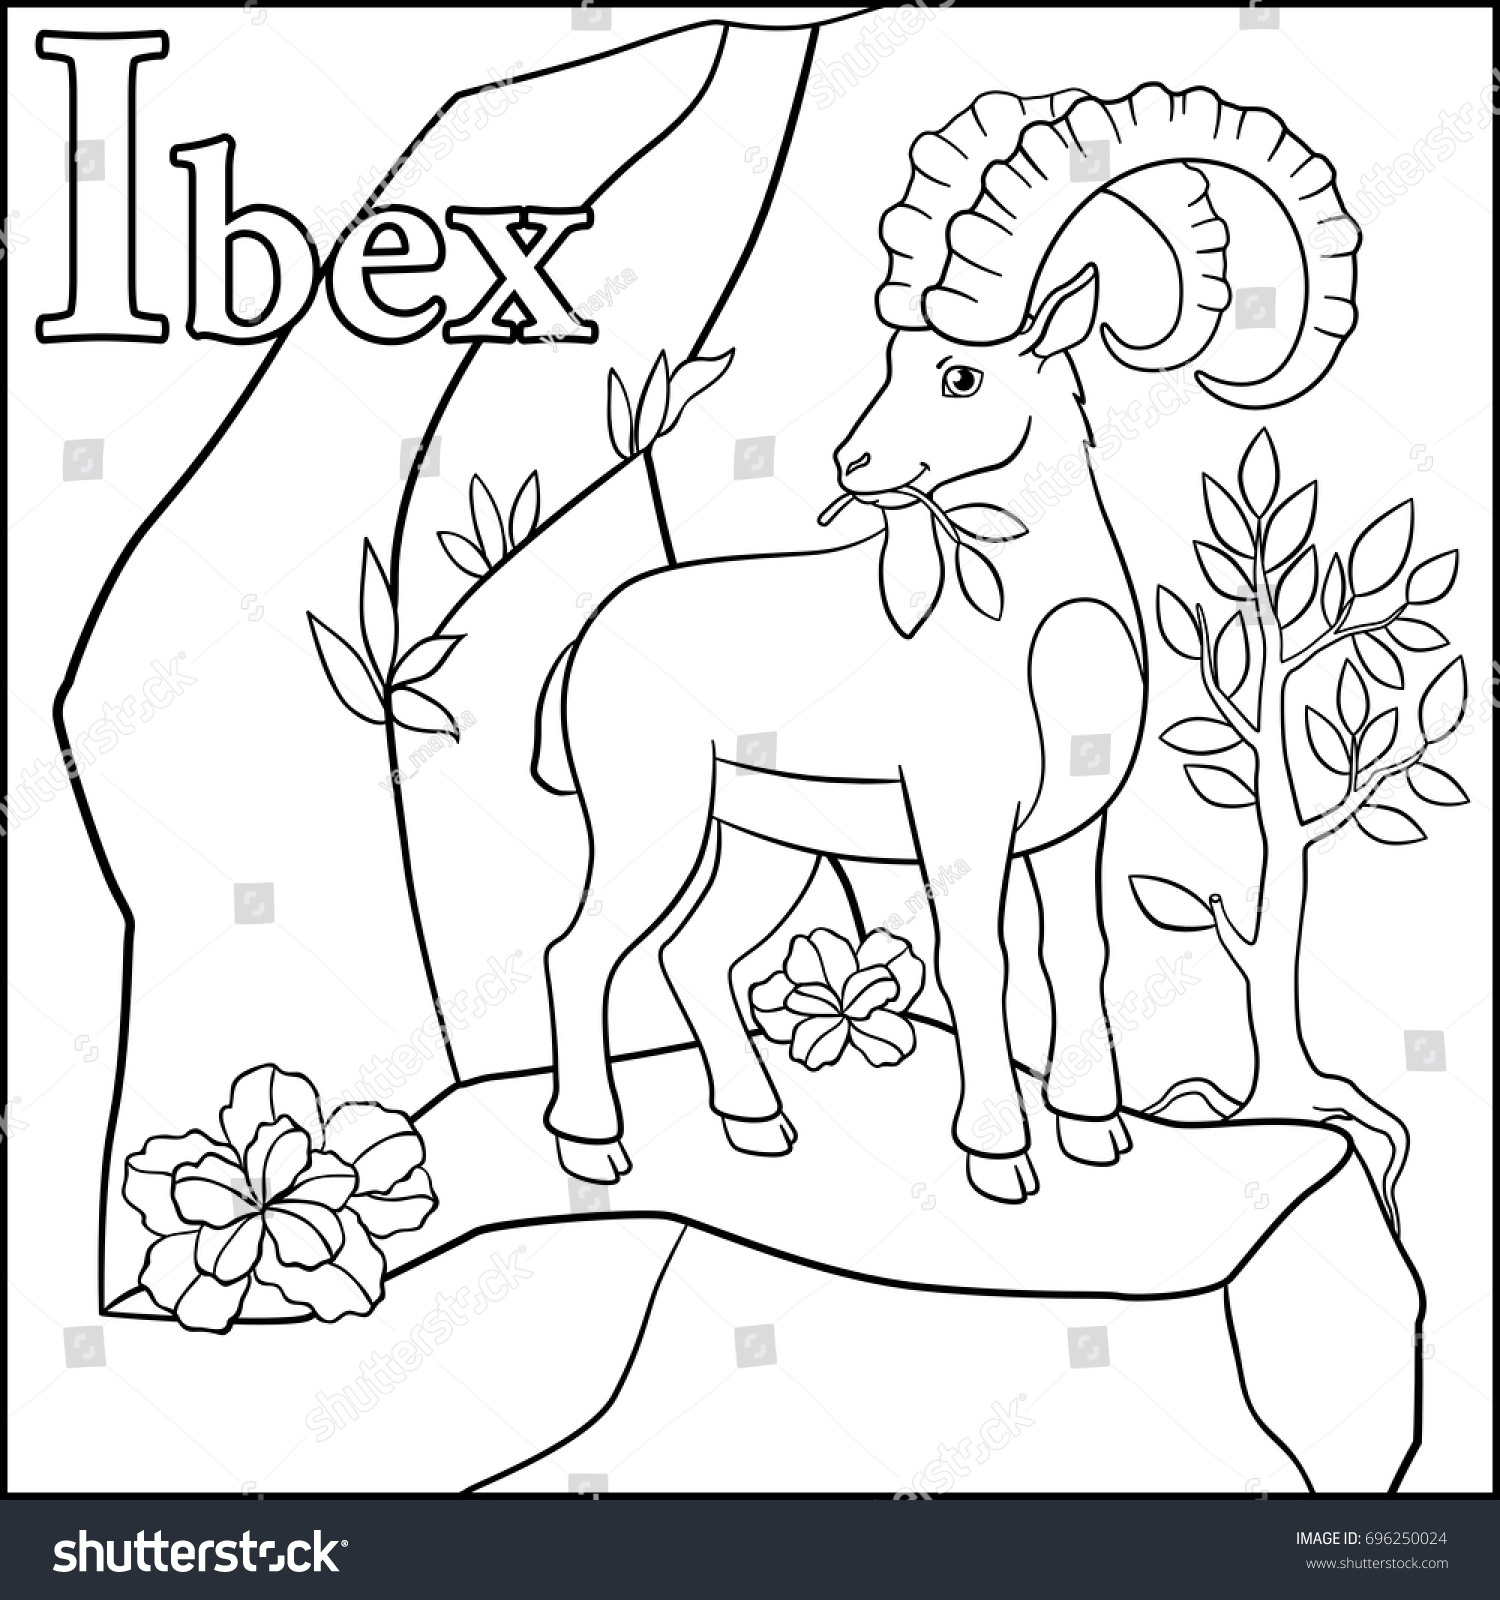 Coloring page Cartoon animals alphabet I is for Ibex